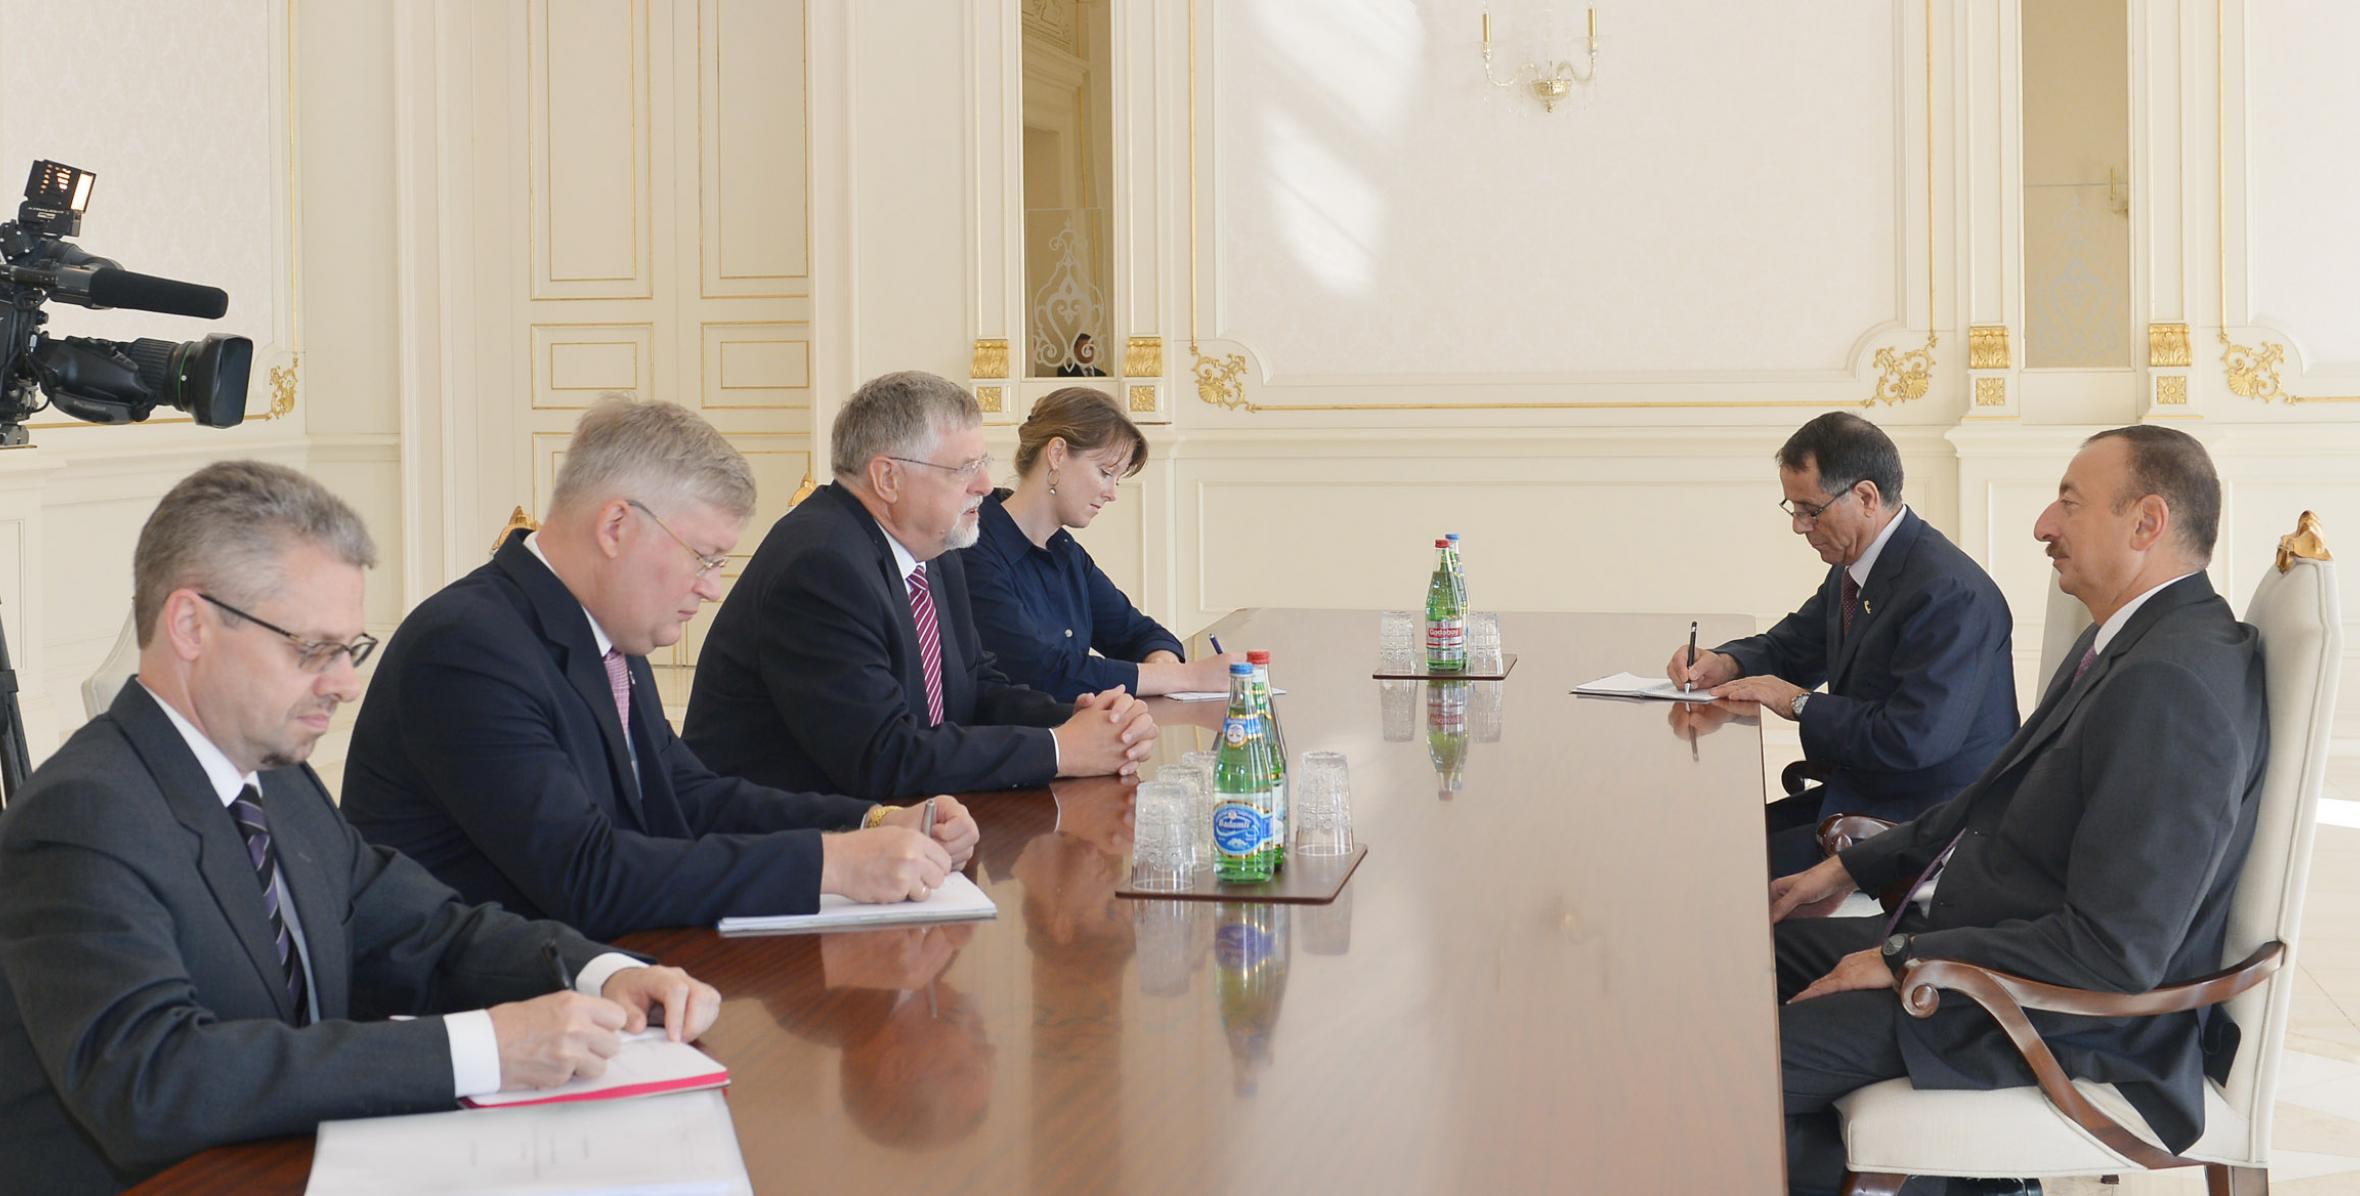 Ilham Aliyev received a delegation led by the EU Special Representative for the South Caucasus